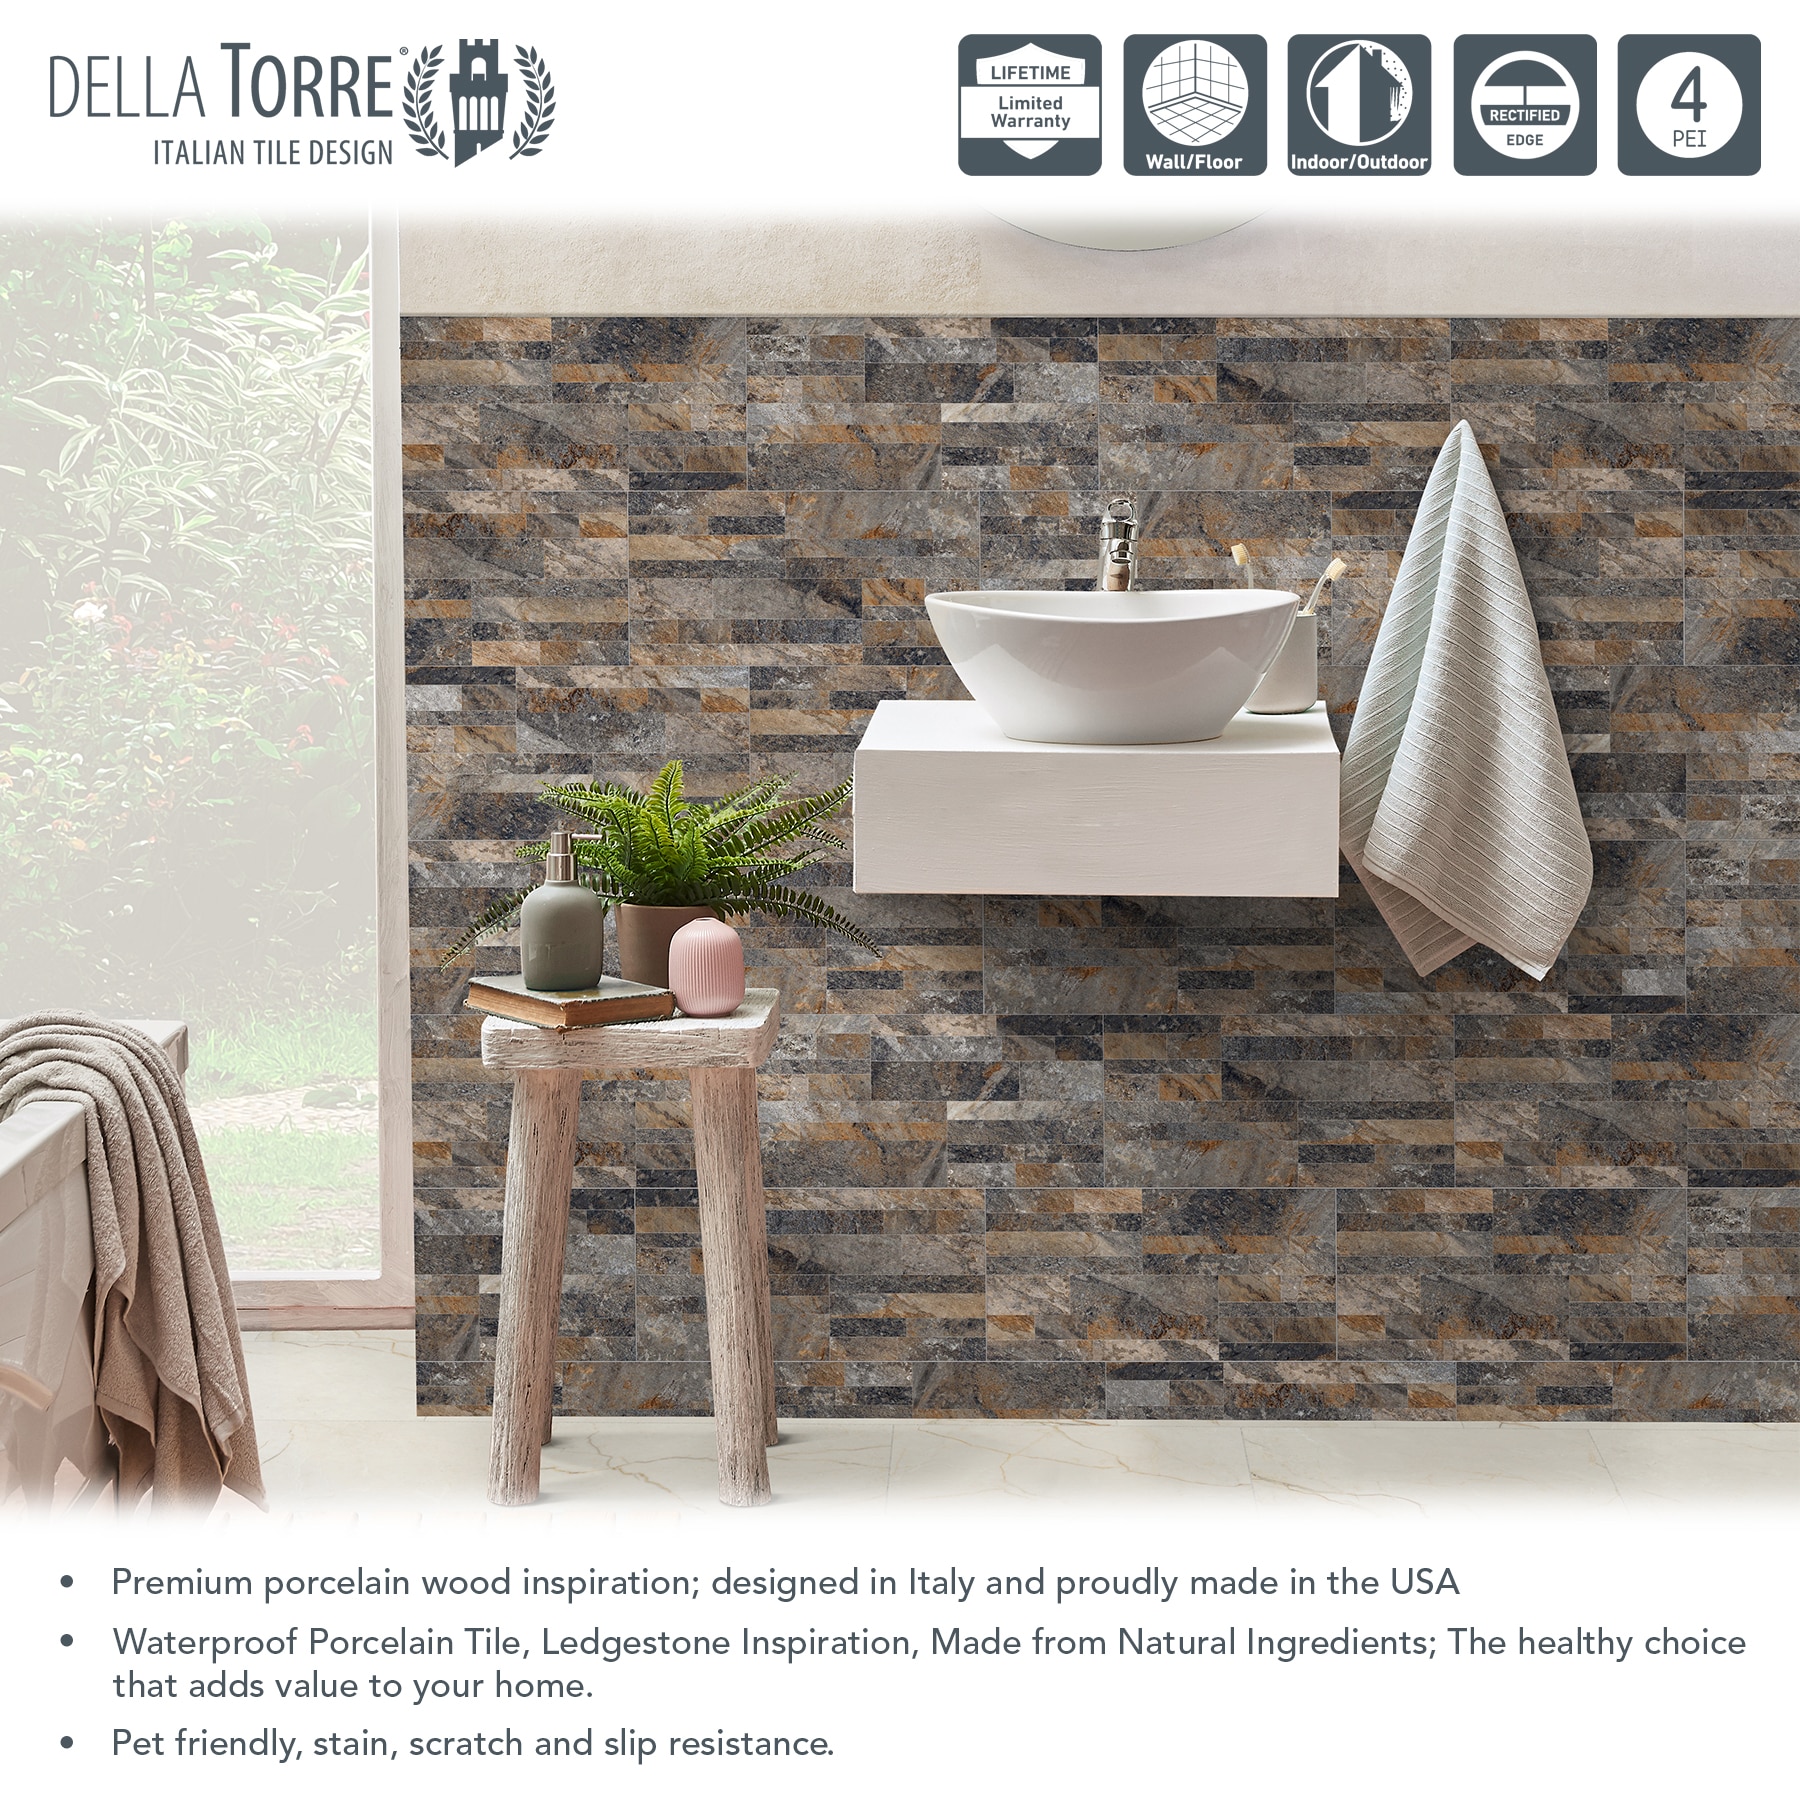 Italian Tiles Made in Ceramic and Porcelain